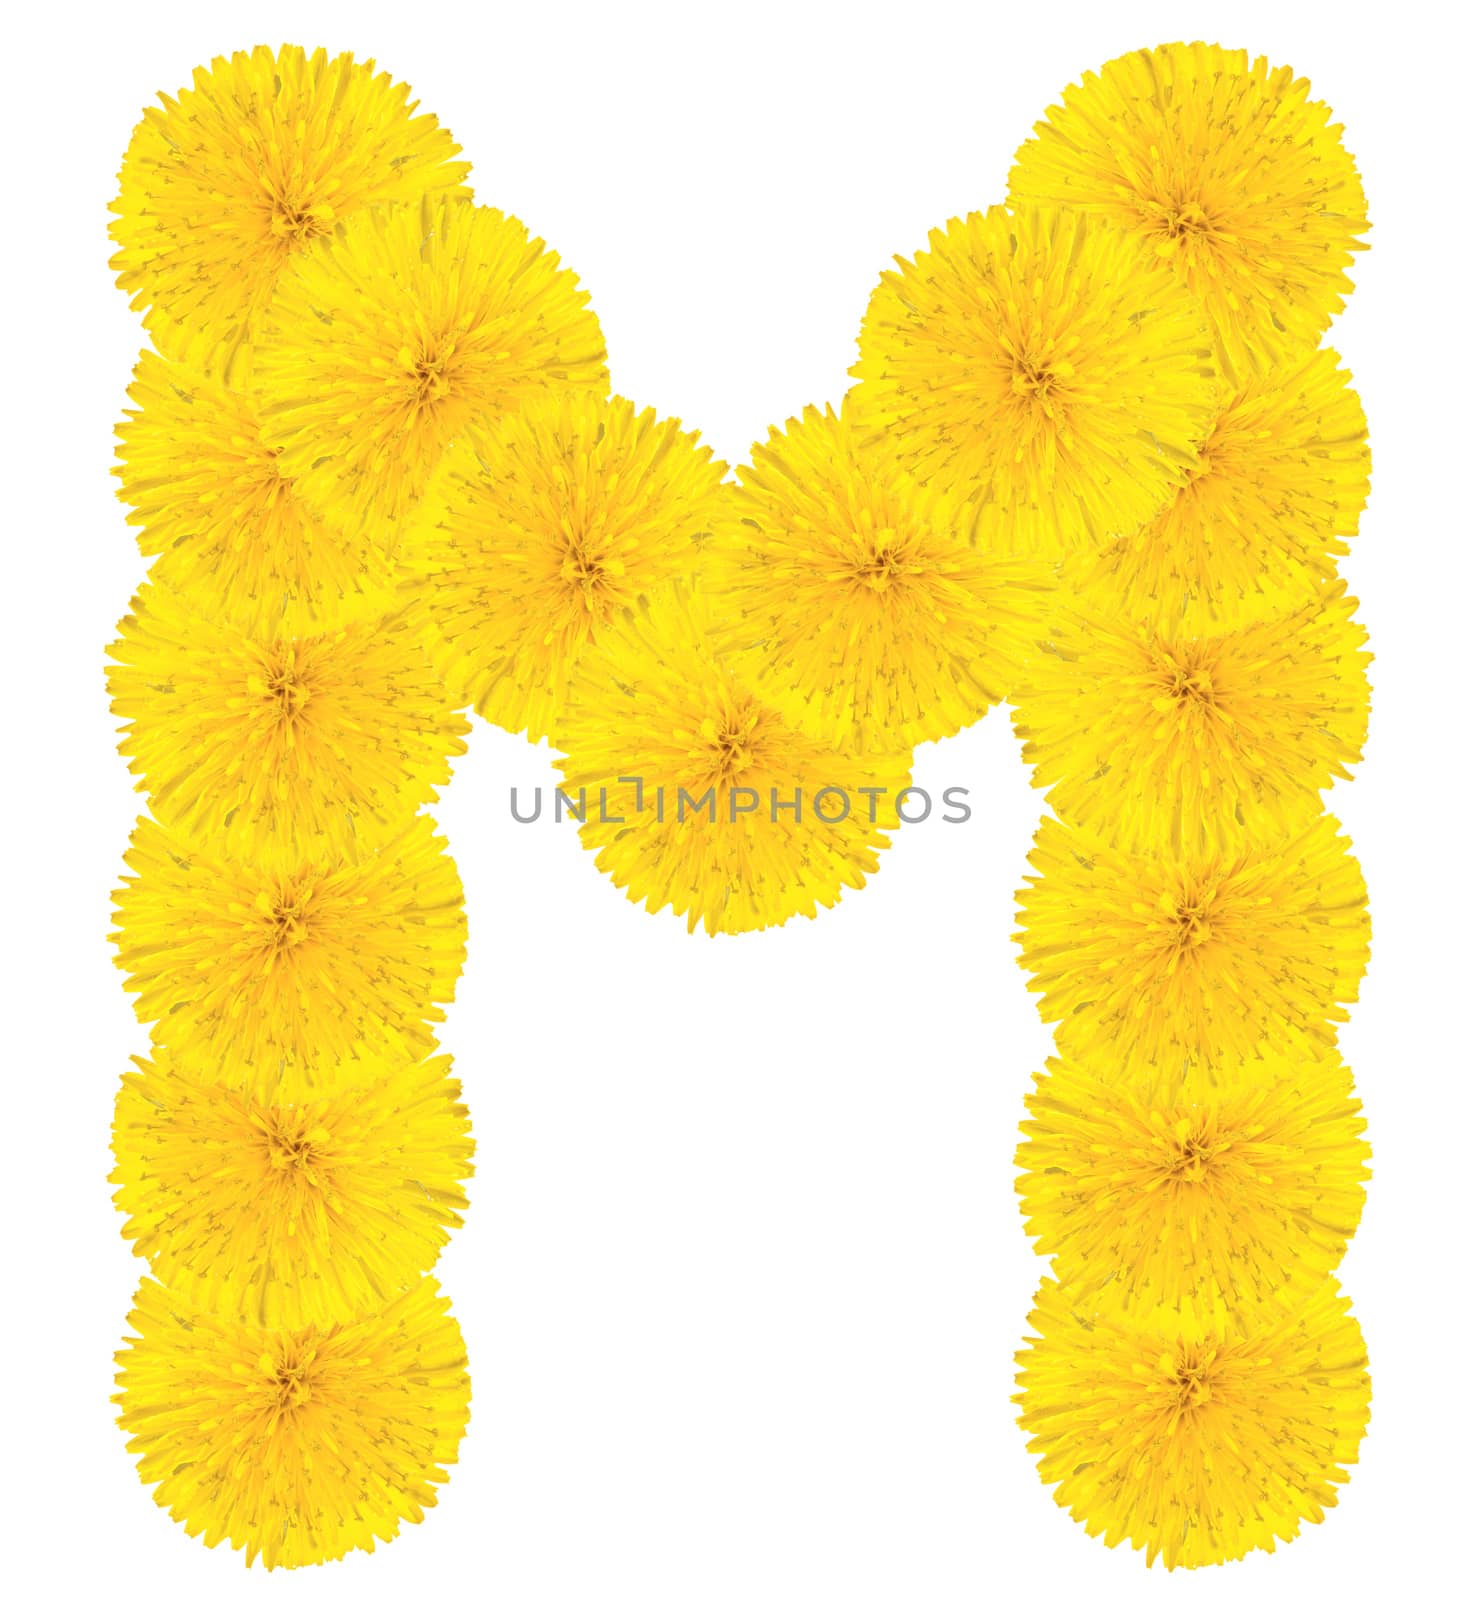 Letter M made from dandelion flowers isolated on white background